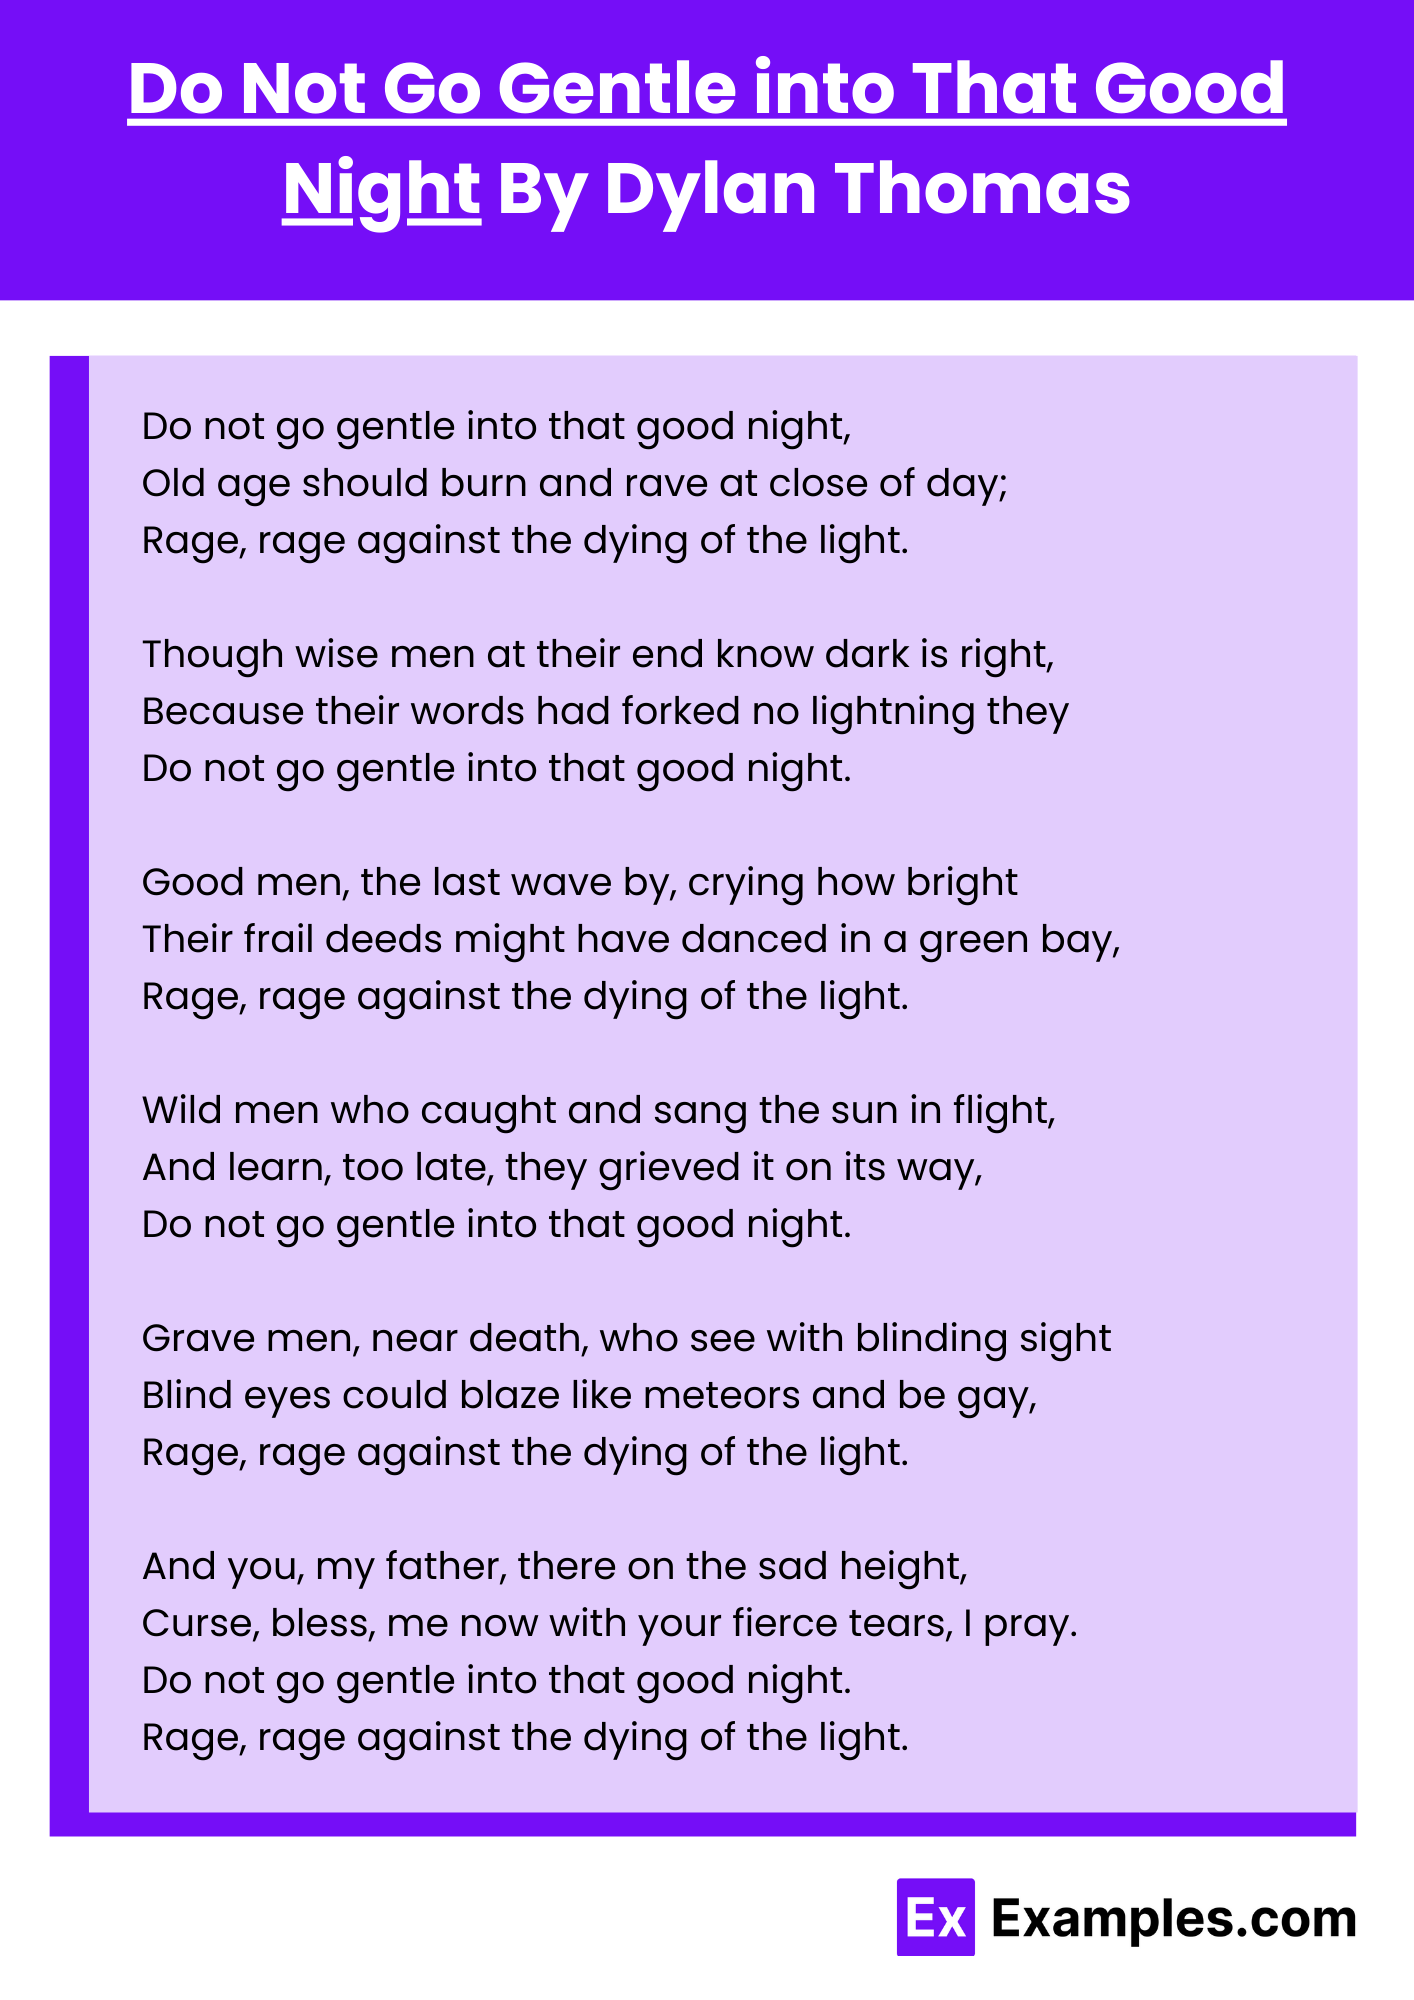 Do Not Go Gentle into That Good Night By Dylan Thomas